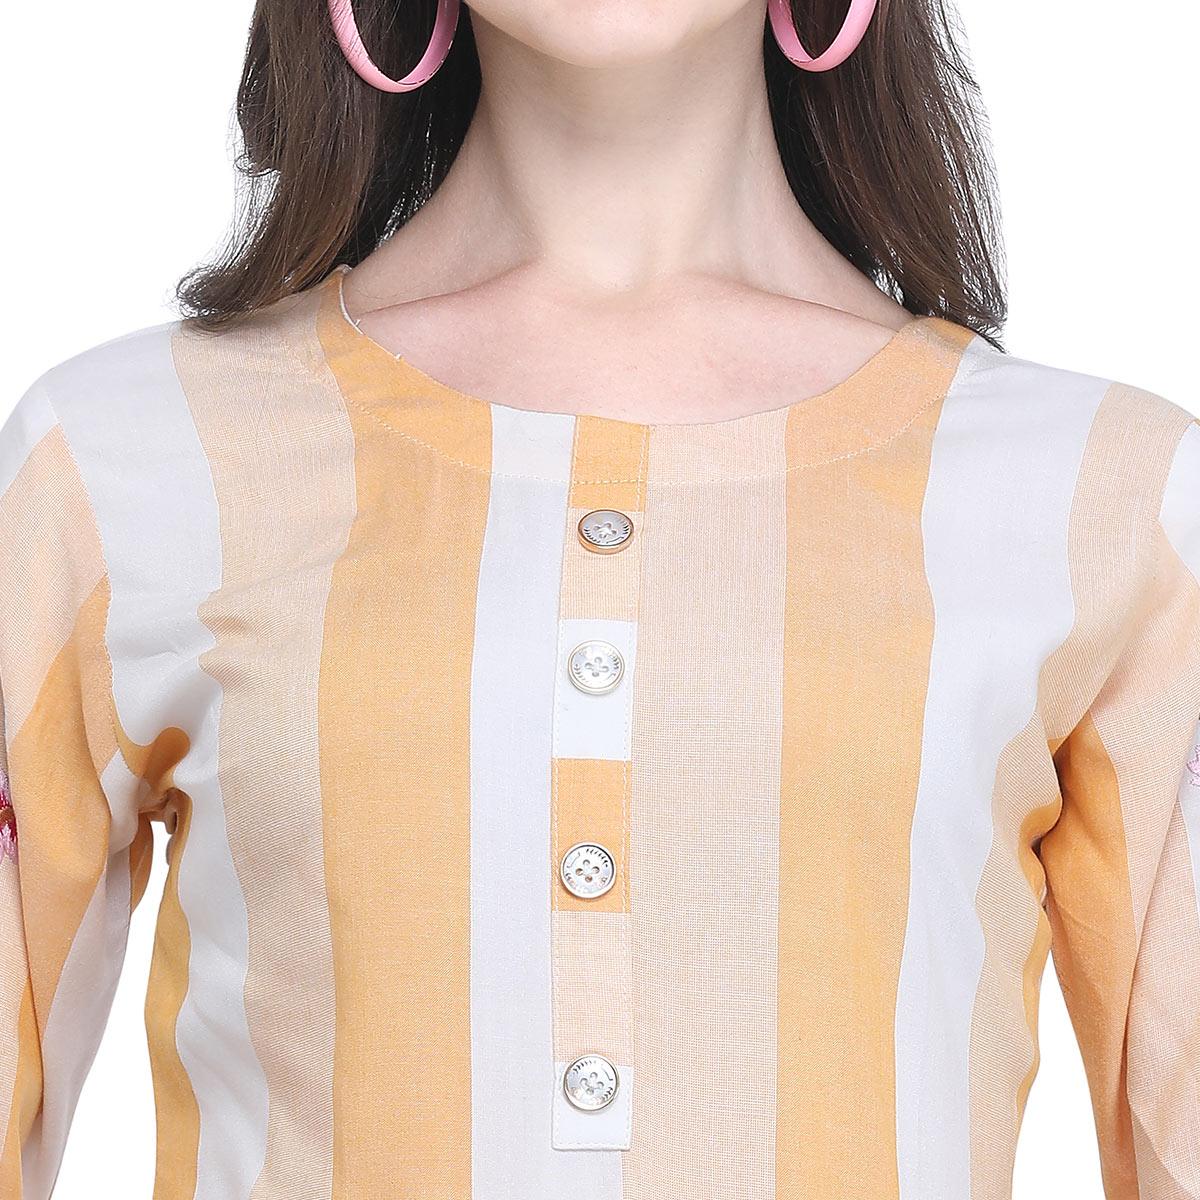 Imposing Light Yellow Colored Casual Embroidered Rayon Kurti - Peachmode